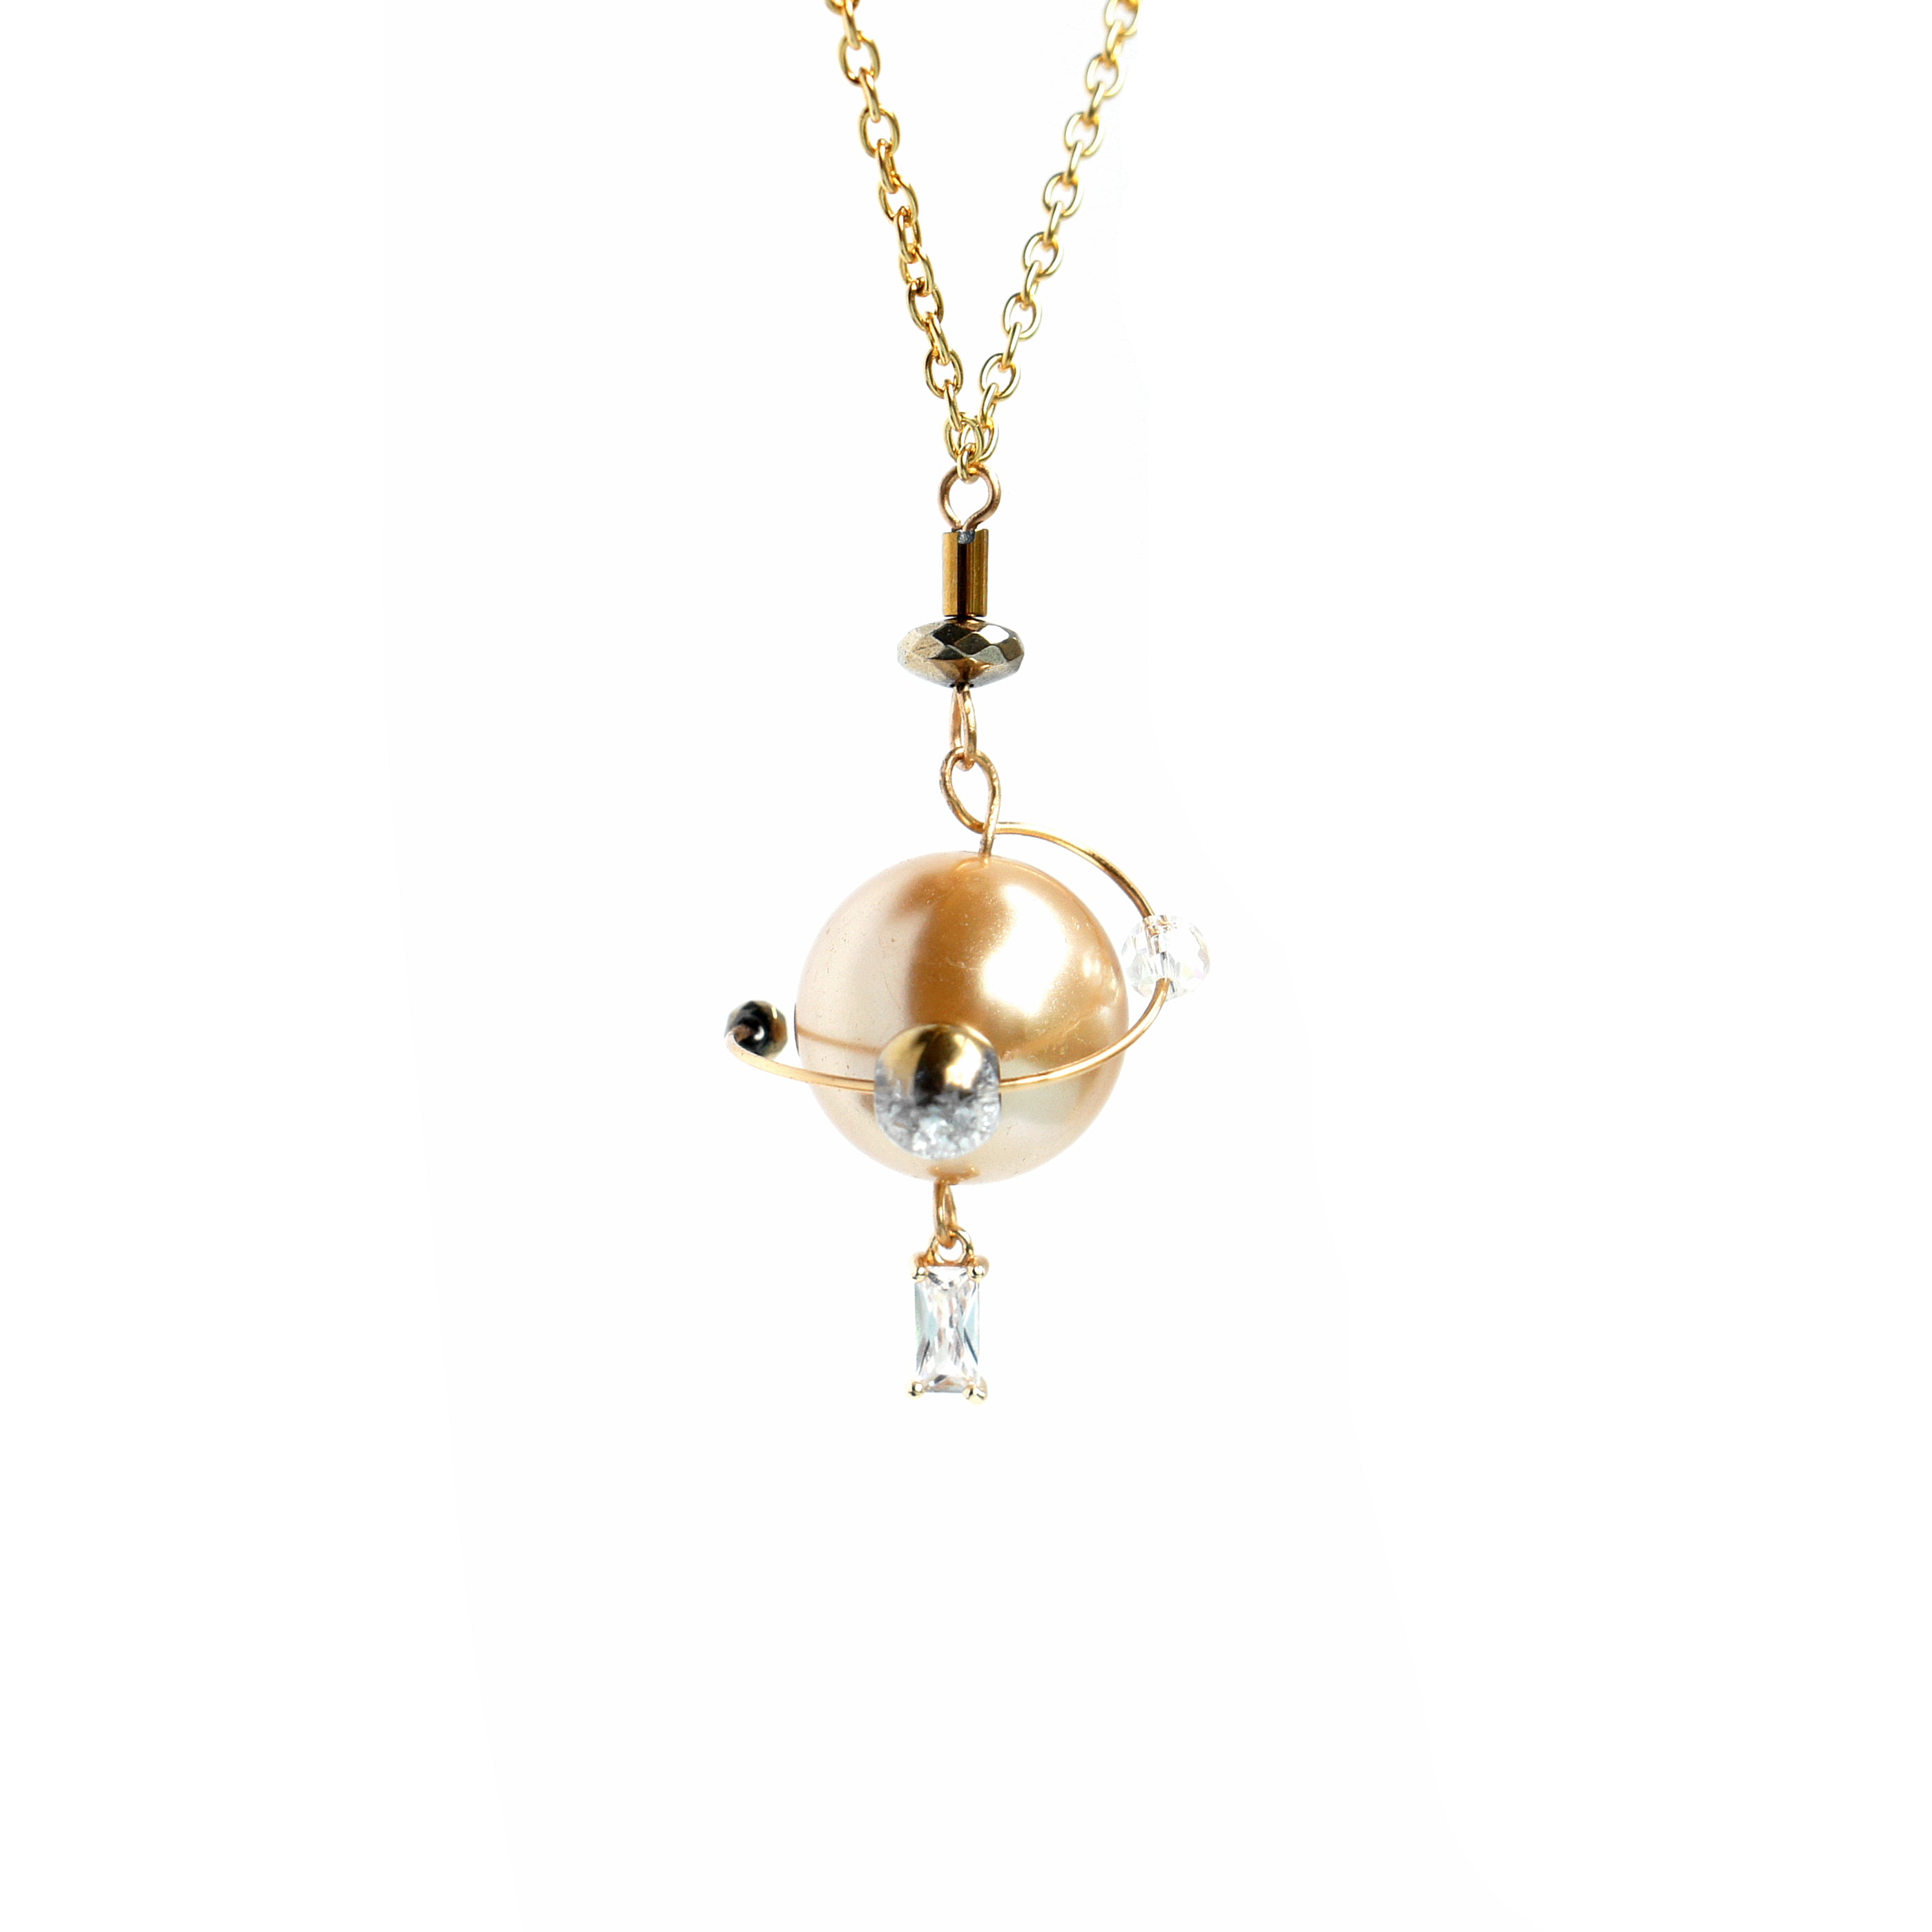 In My Orbit Pearl and Crystal Charm Necklace